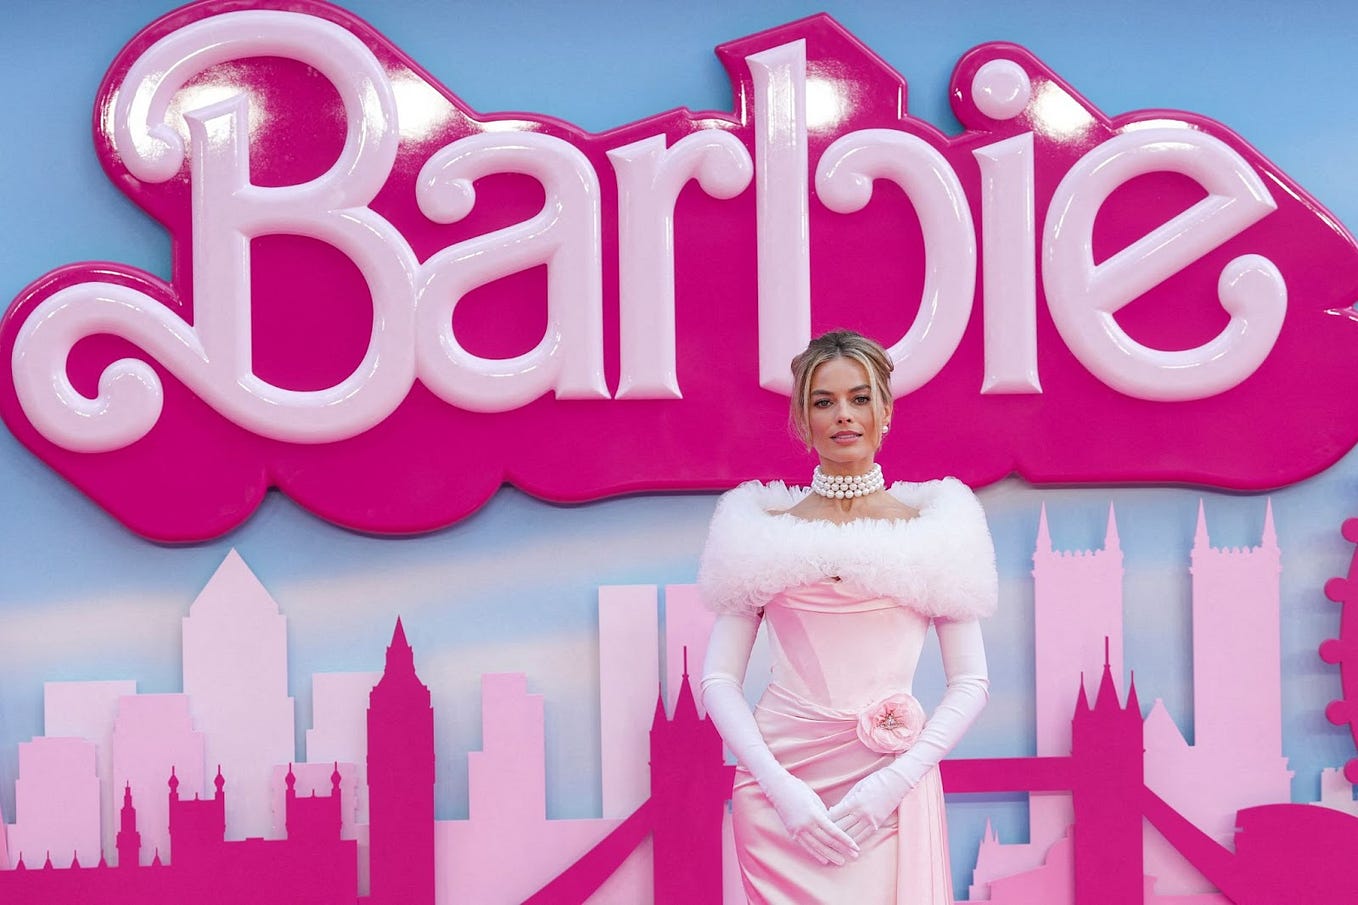 #Barbie — An Introduction to Feminism, Patriarchy, and Gender Wars